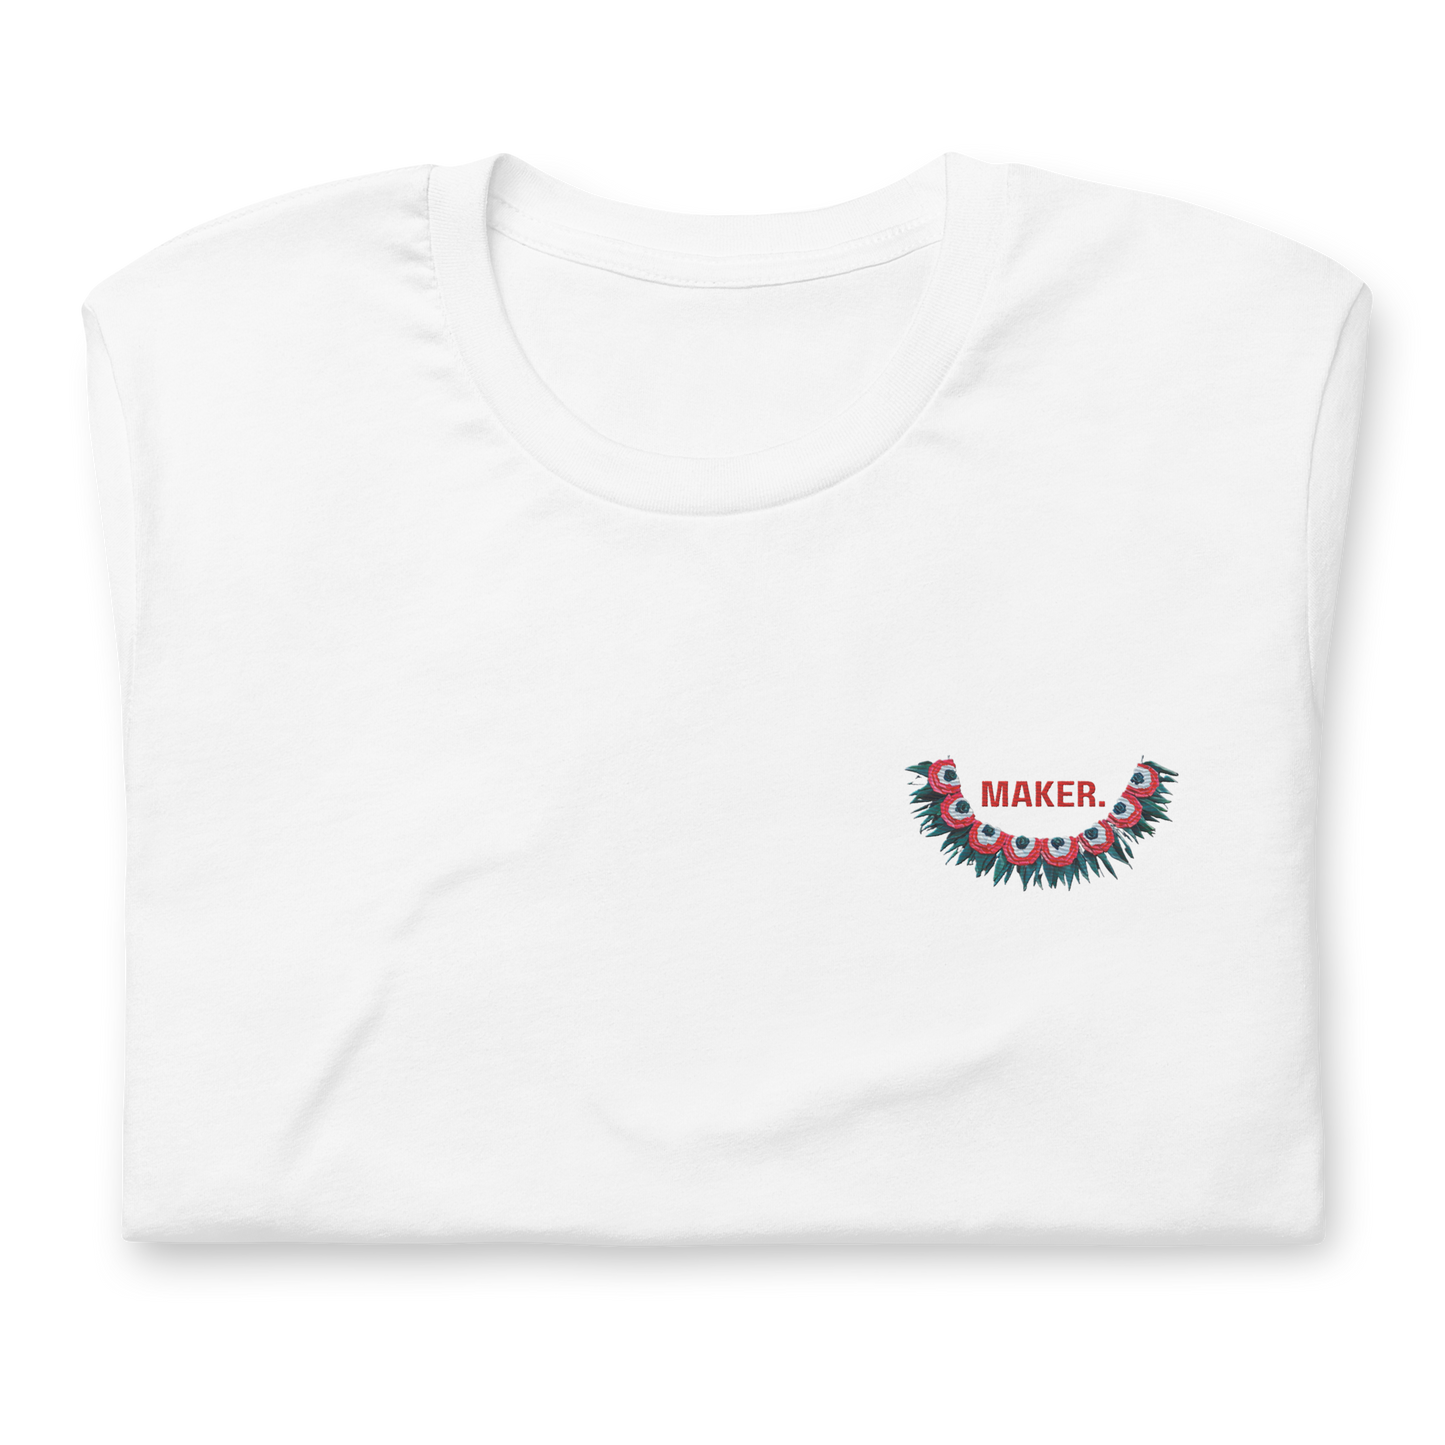 "Maker." Lei Embroidered Tee